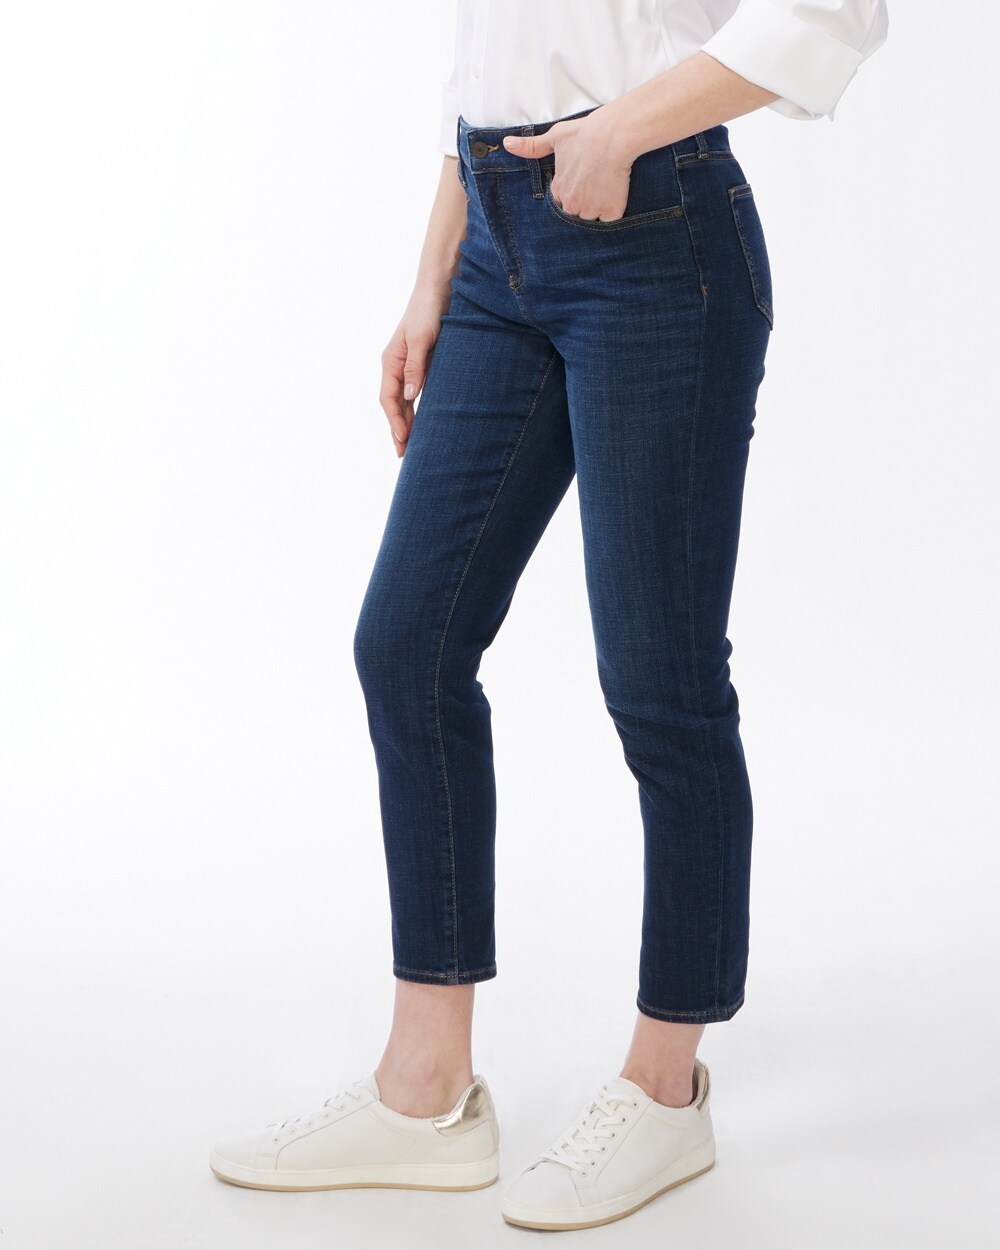 So Slimming Girlfriend Ankle Jeans video preview image, click to start video